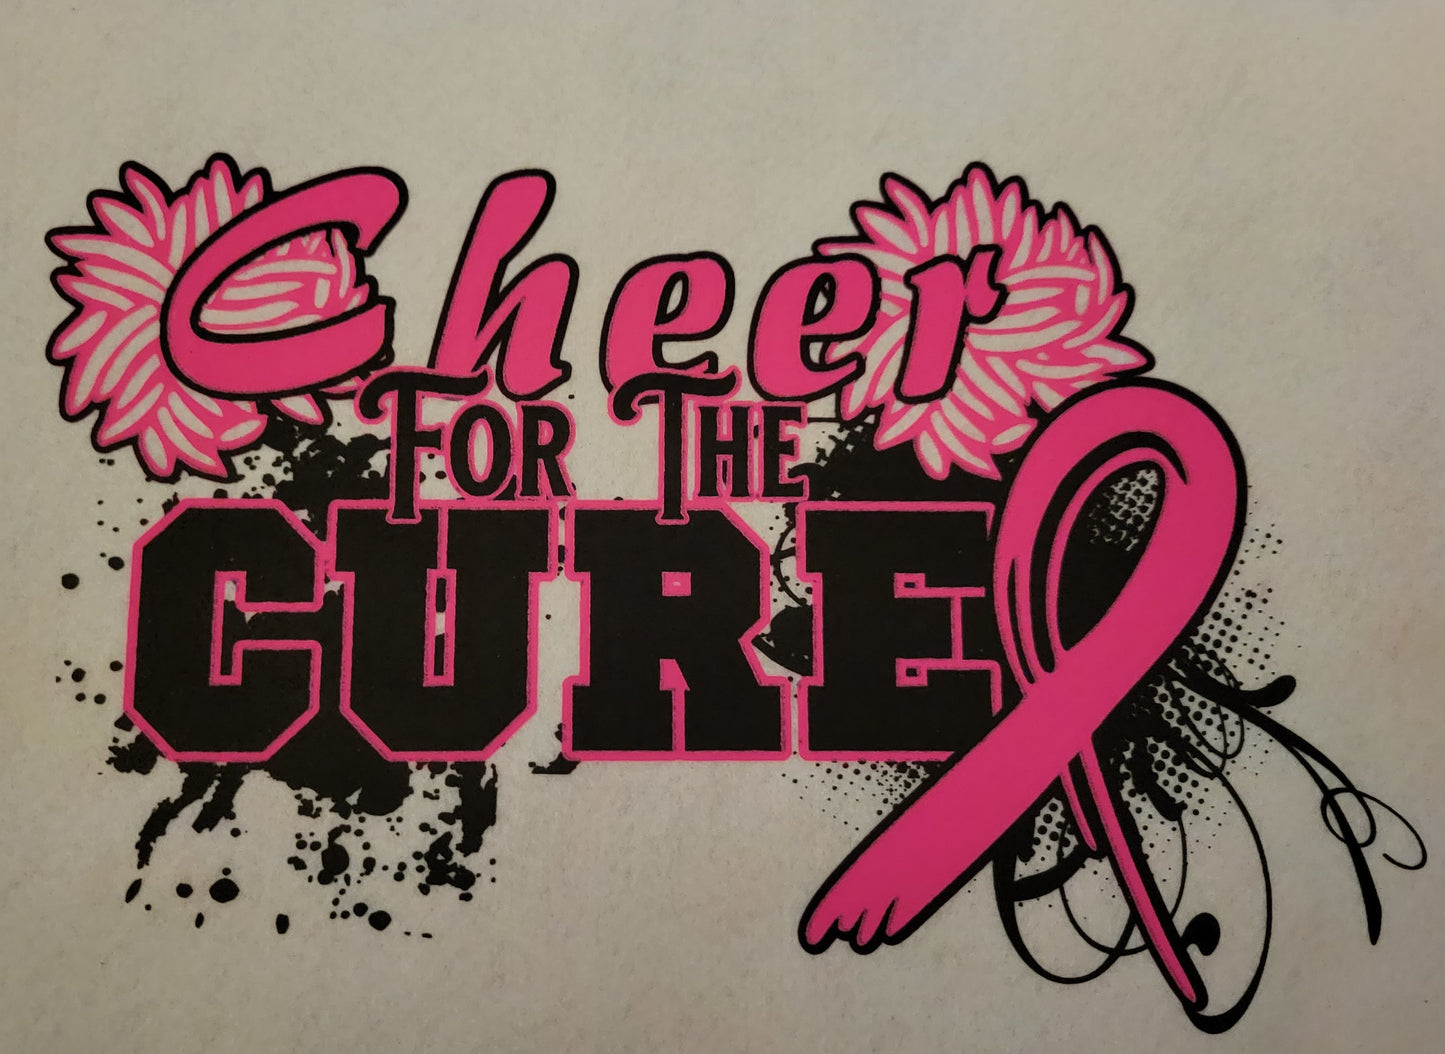 Cheer for the cure